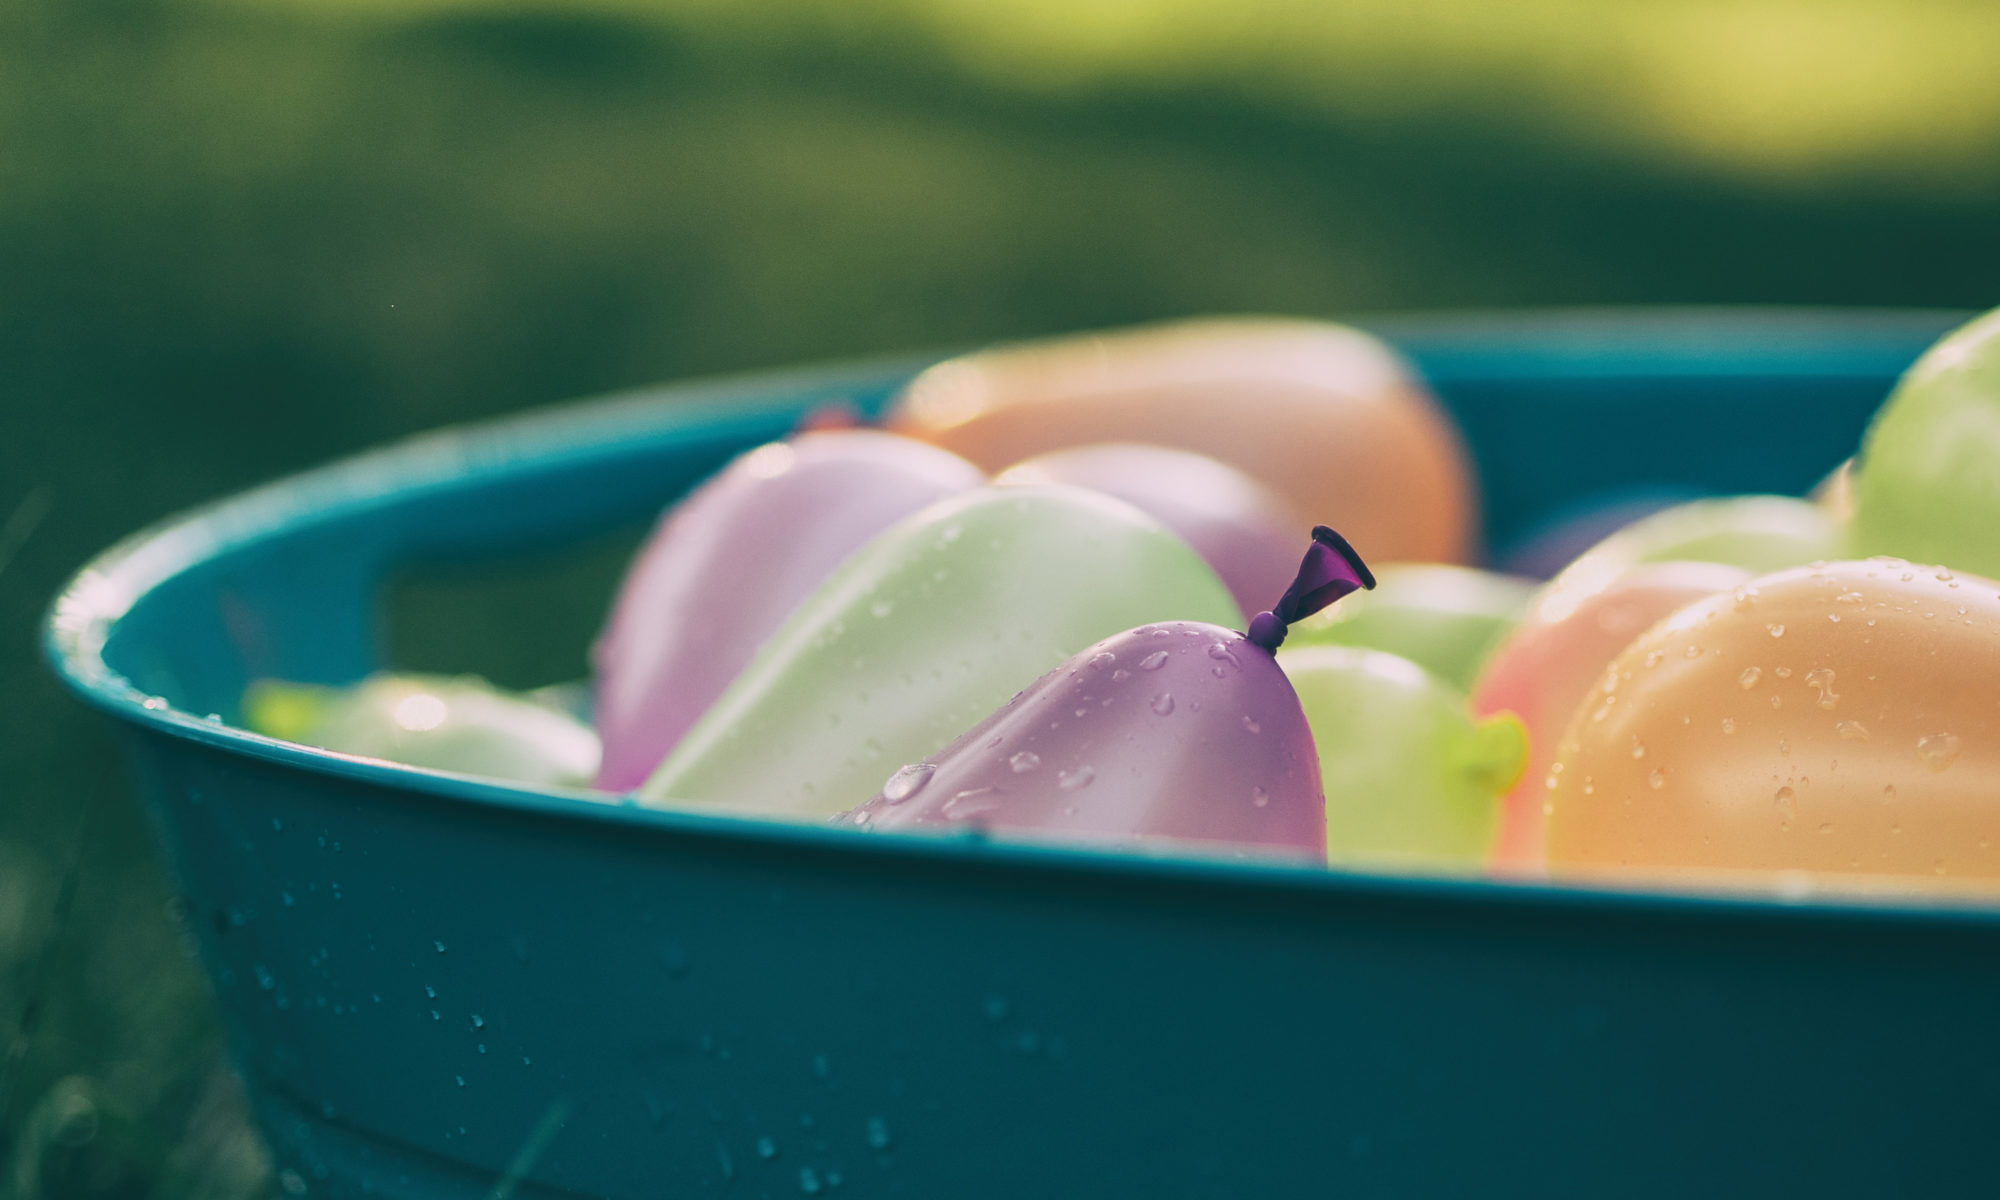 Picture of water balloons in a tub